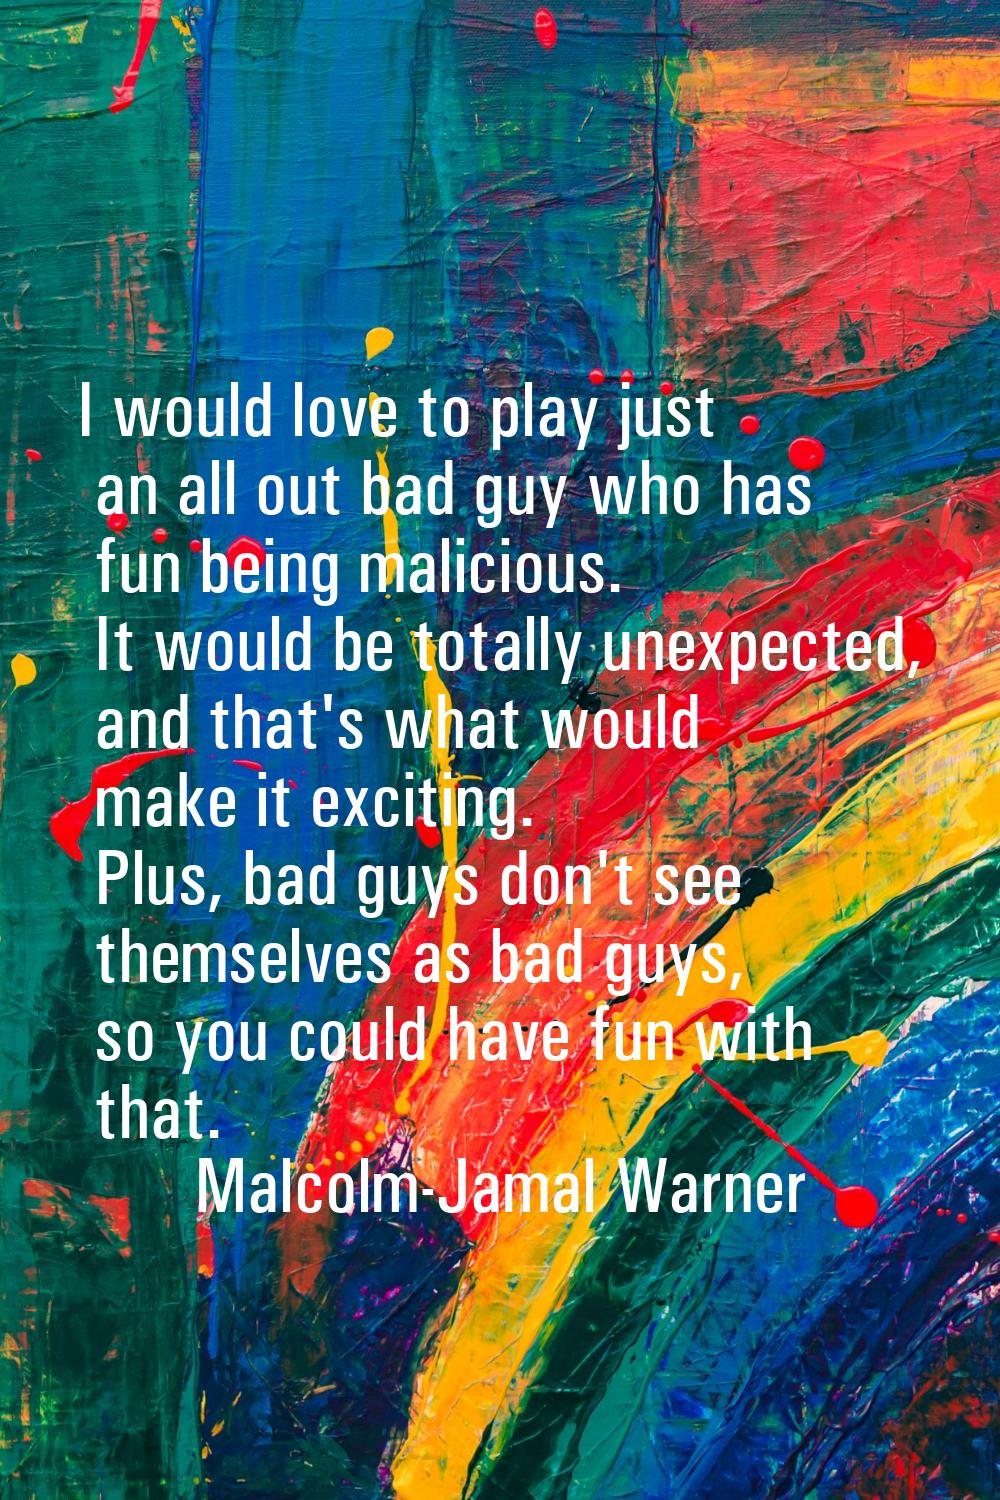 I would love to play just an all out bad guy who has fun being malicious. It would be totally unexp